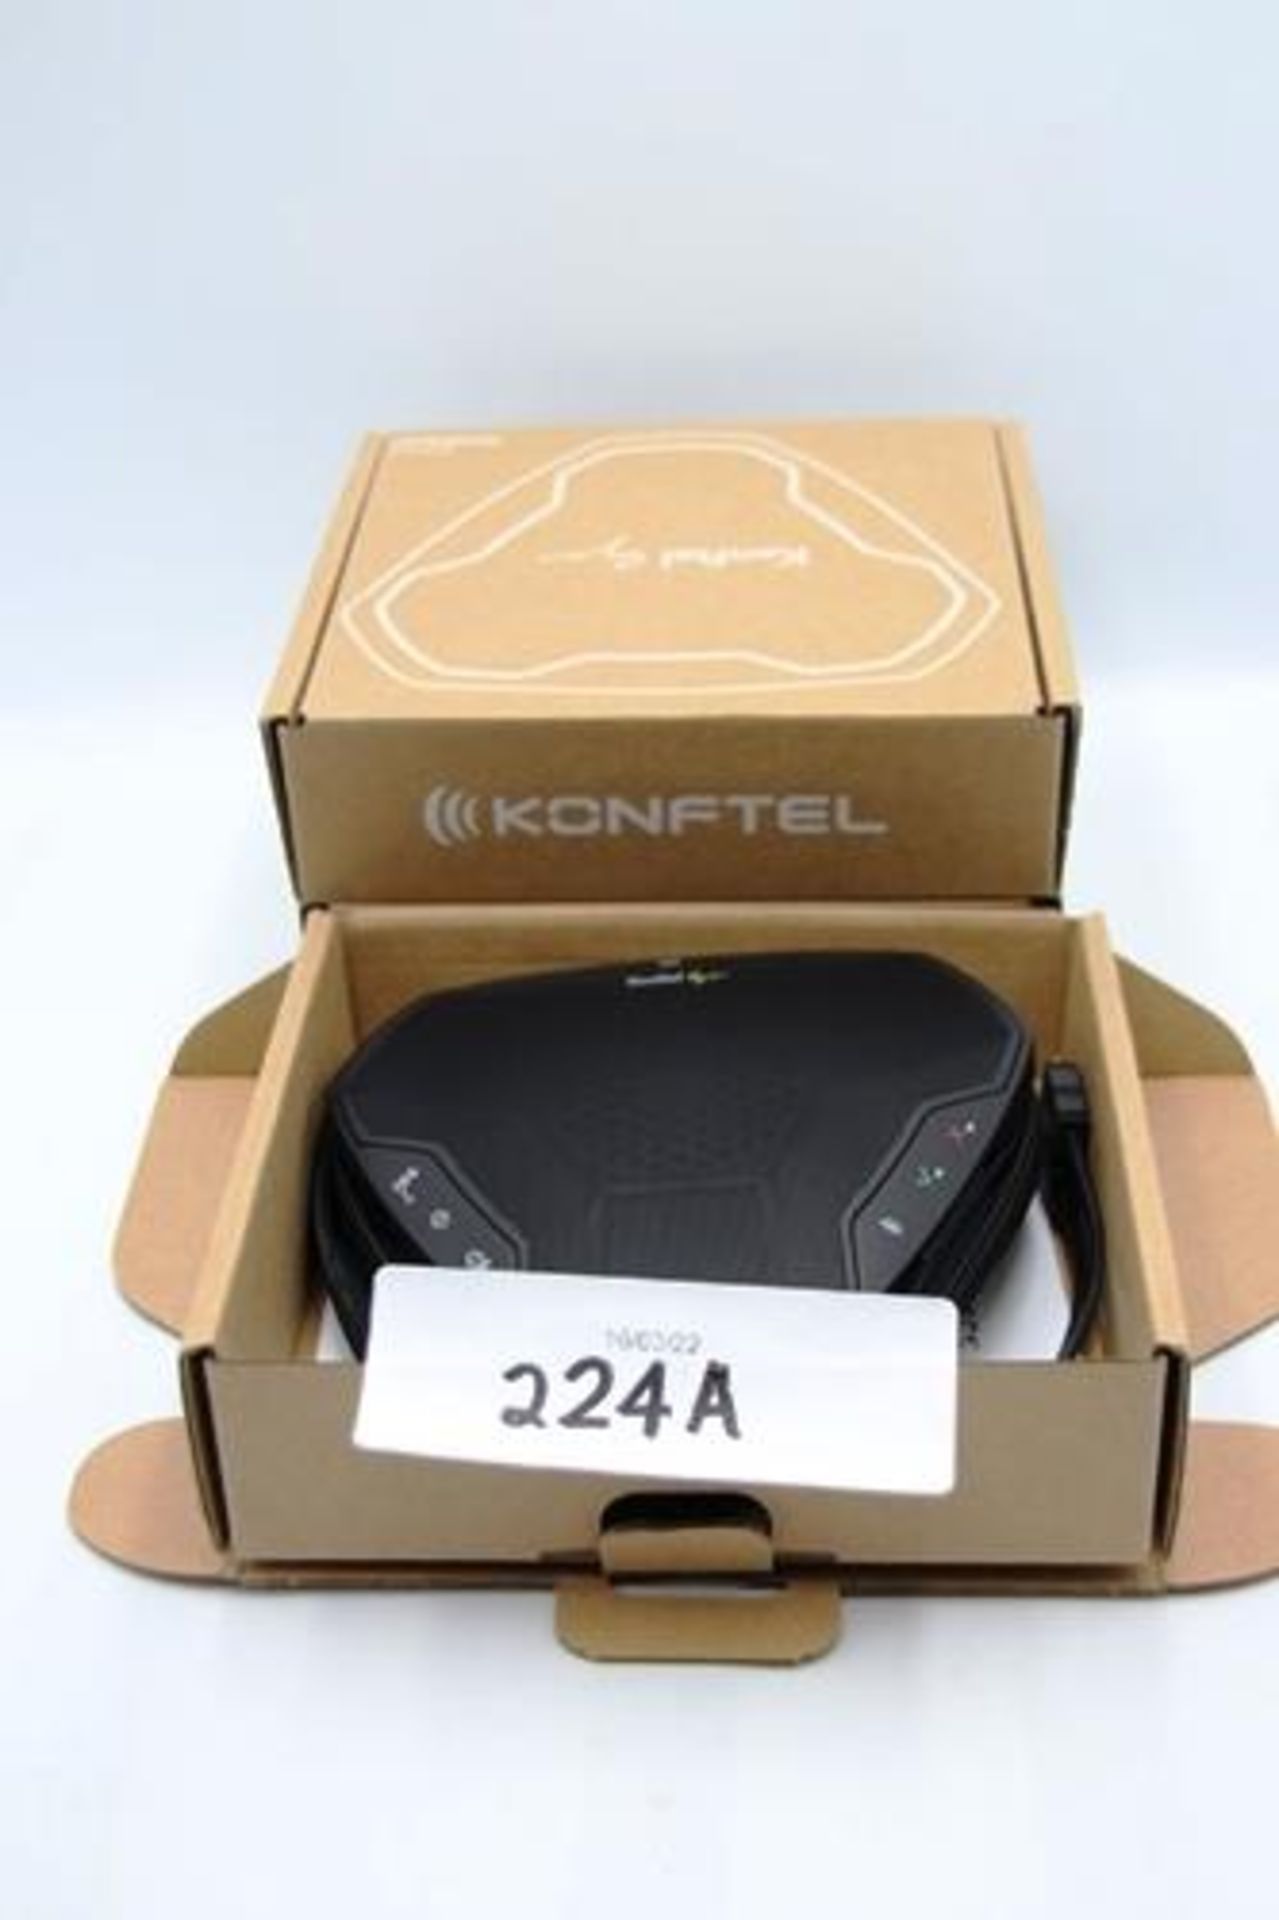 3 x Konftel Ego mobile conference systems, model 910101081 - possible returns - untested (cabs